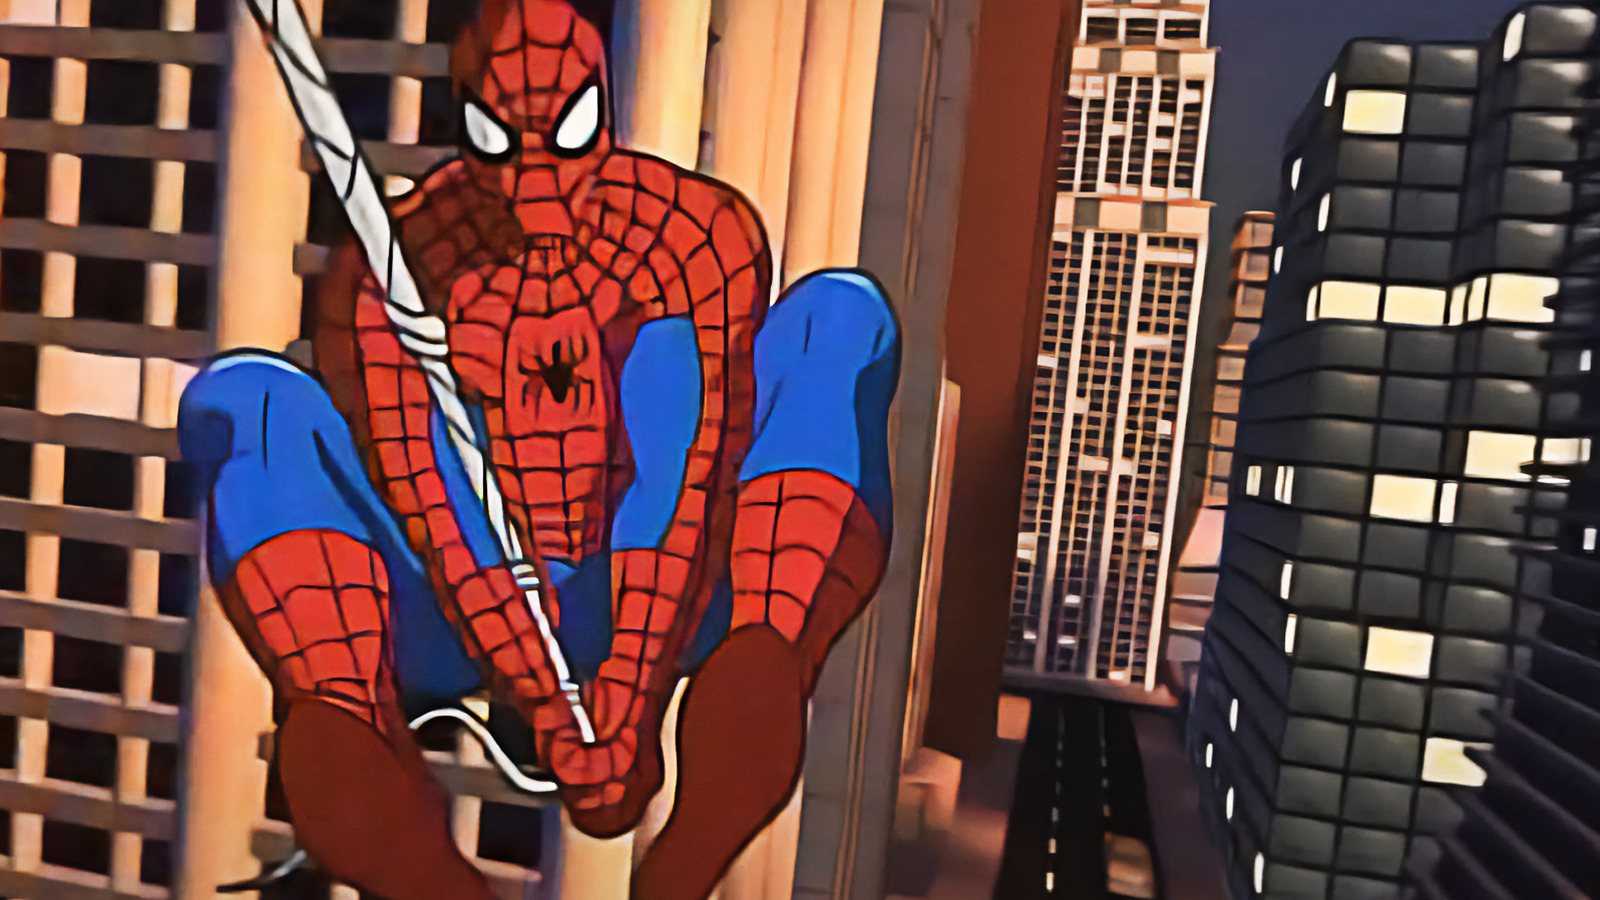 Song of Spider-Man: The Inside Story of the Most Controversial